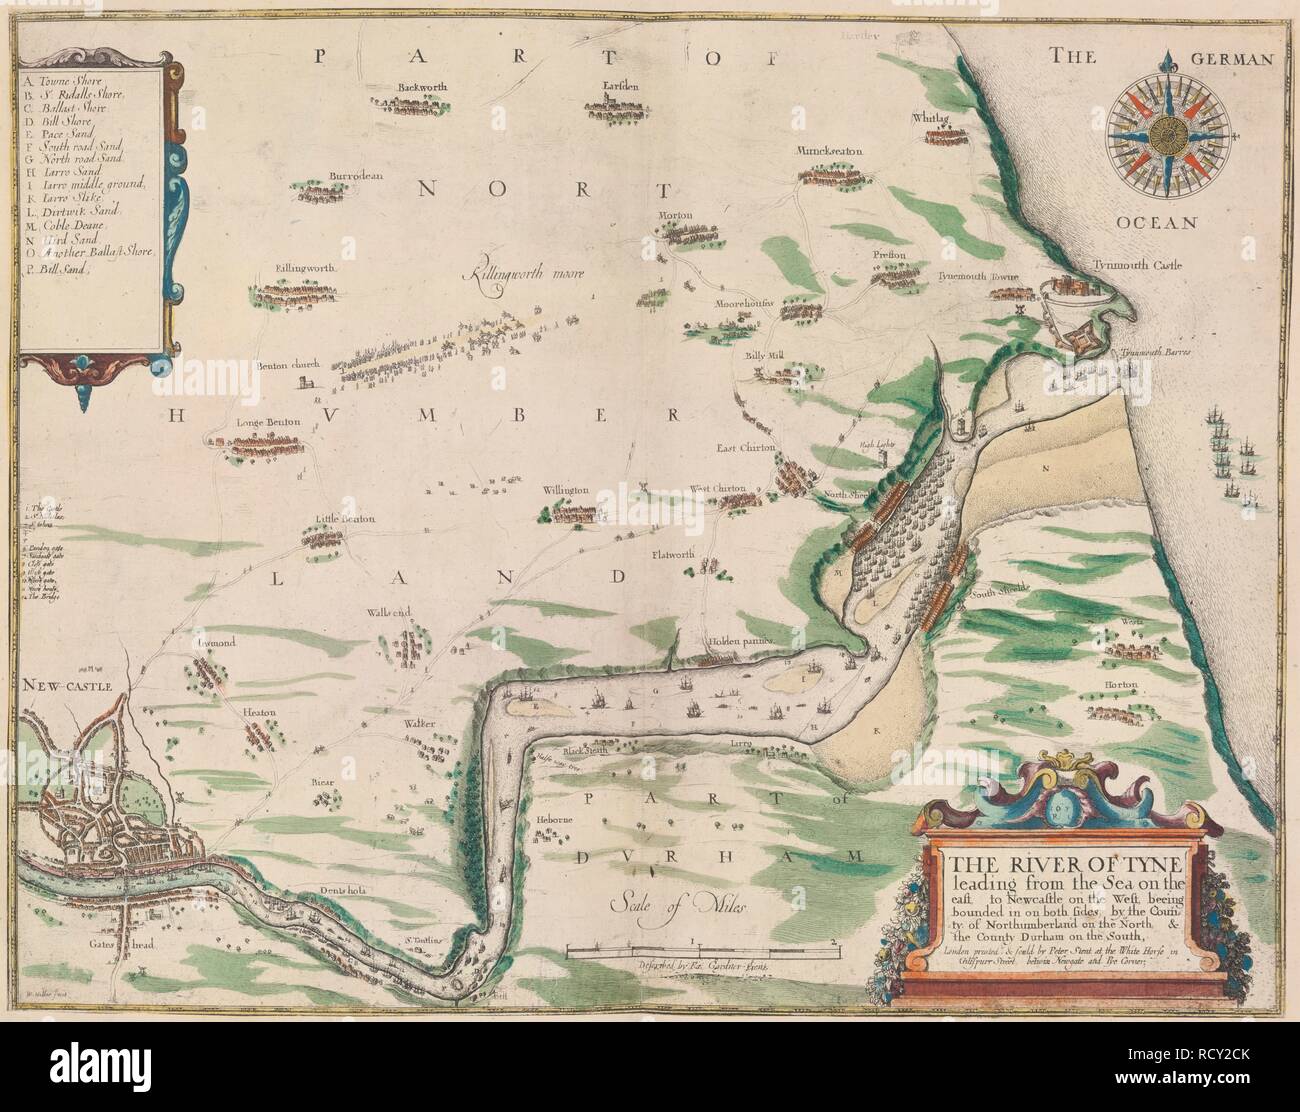 The River of Tyne. The River of Tyne ... London : R. Ibbitson and P. Stent, 1655. Source: Maps.1.Tab.18, 41. Stock Photo